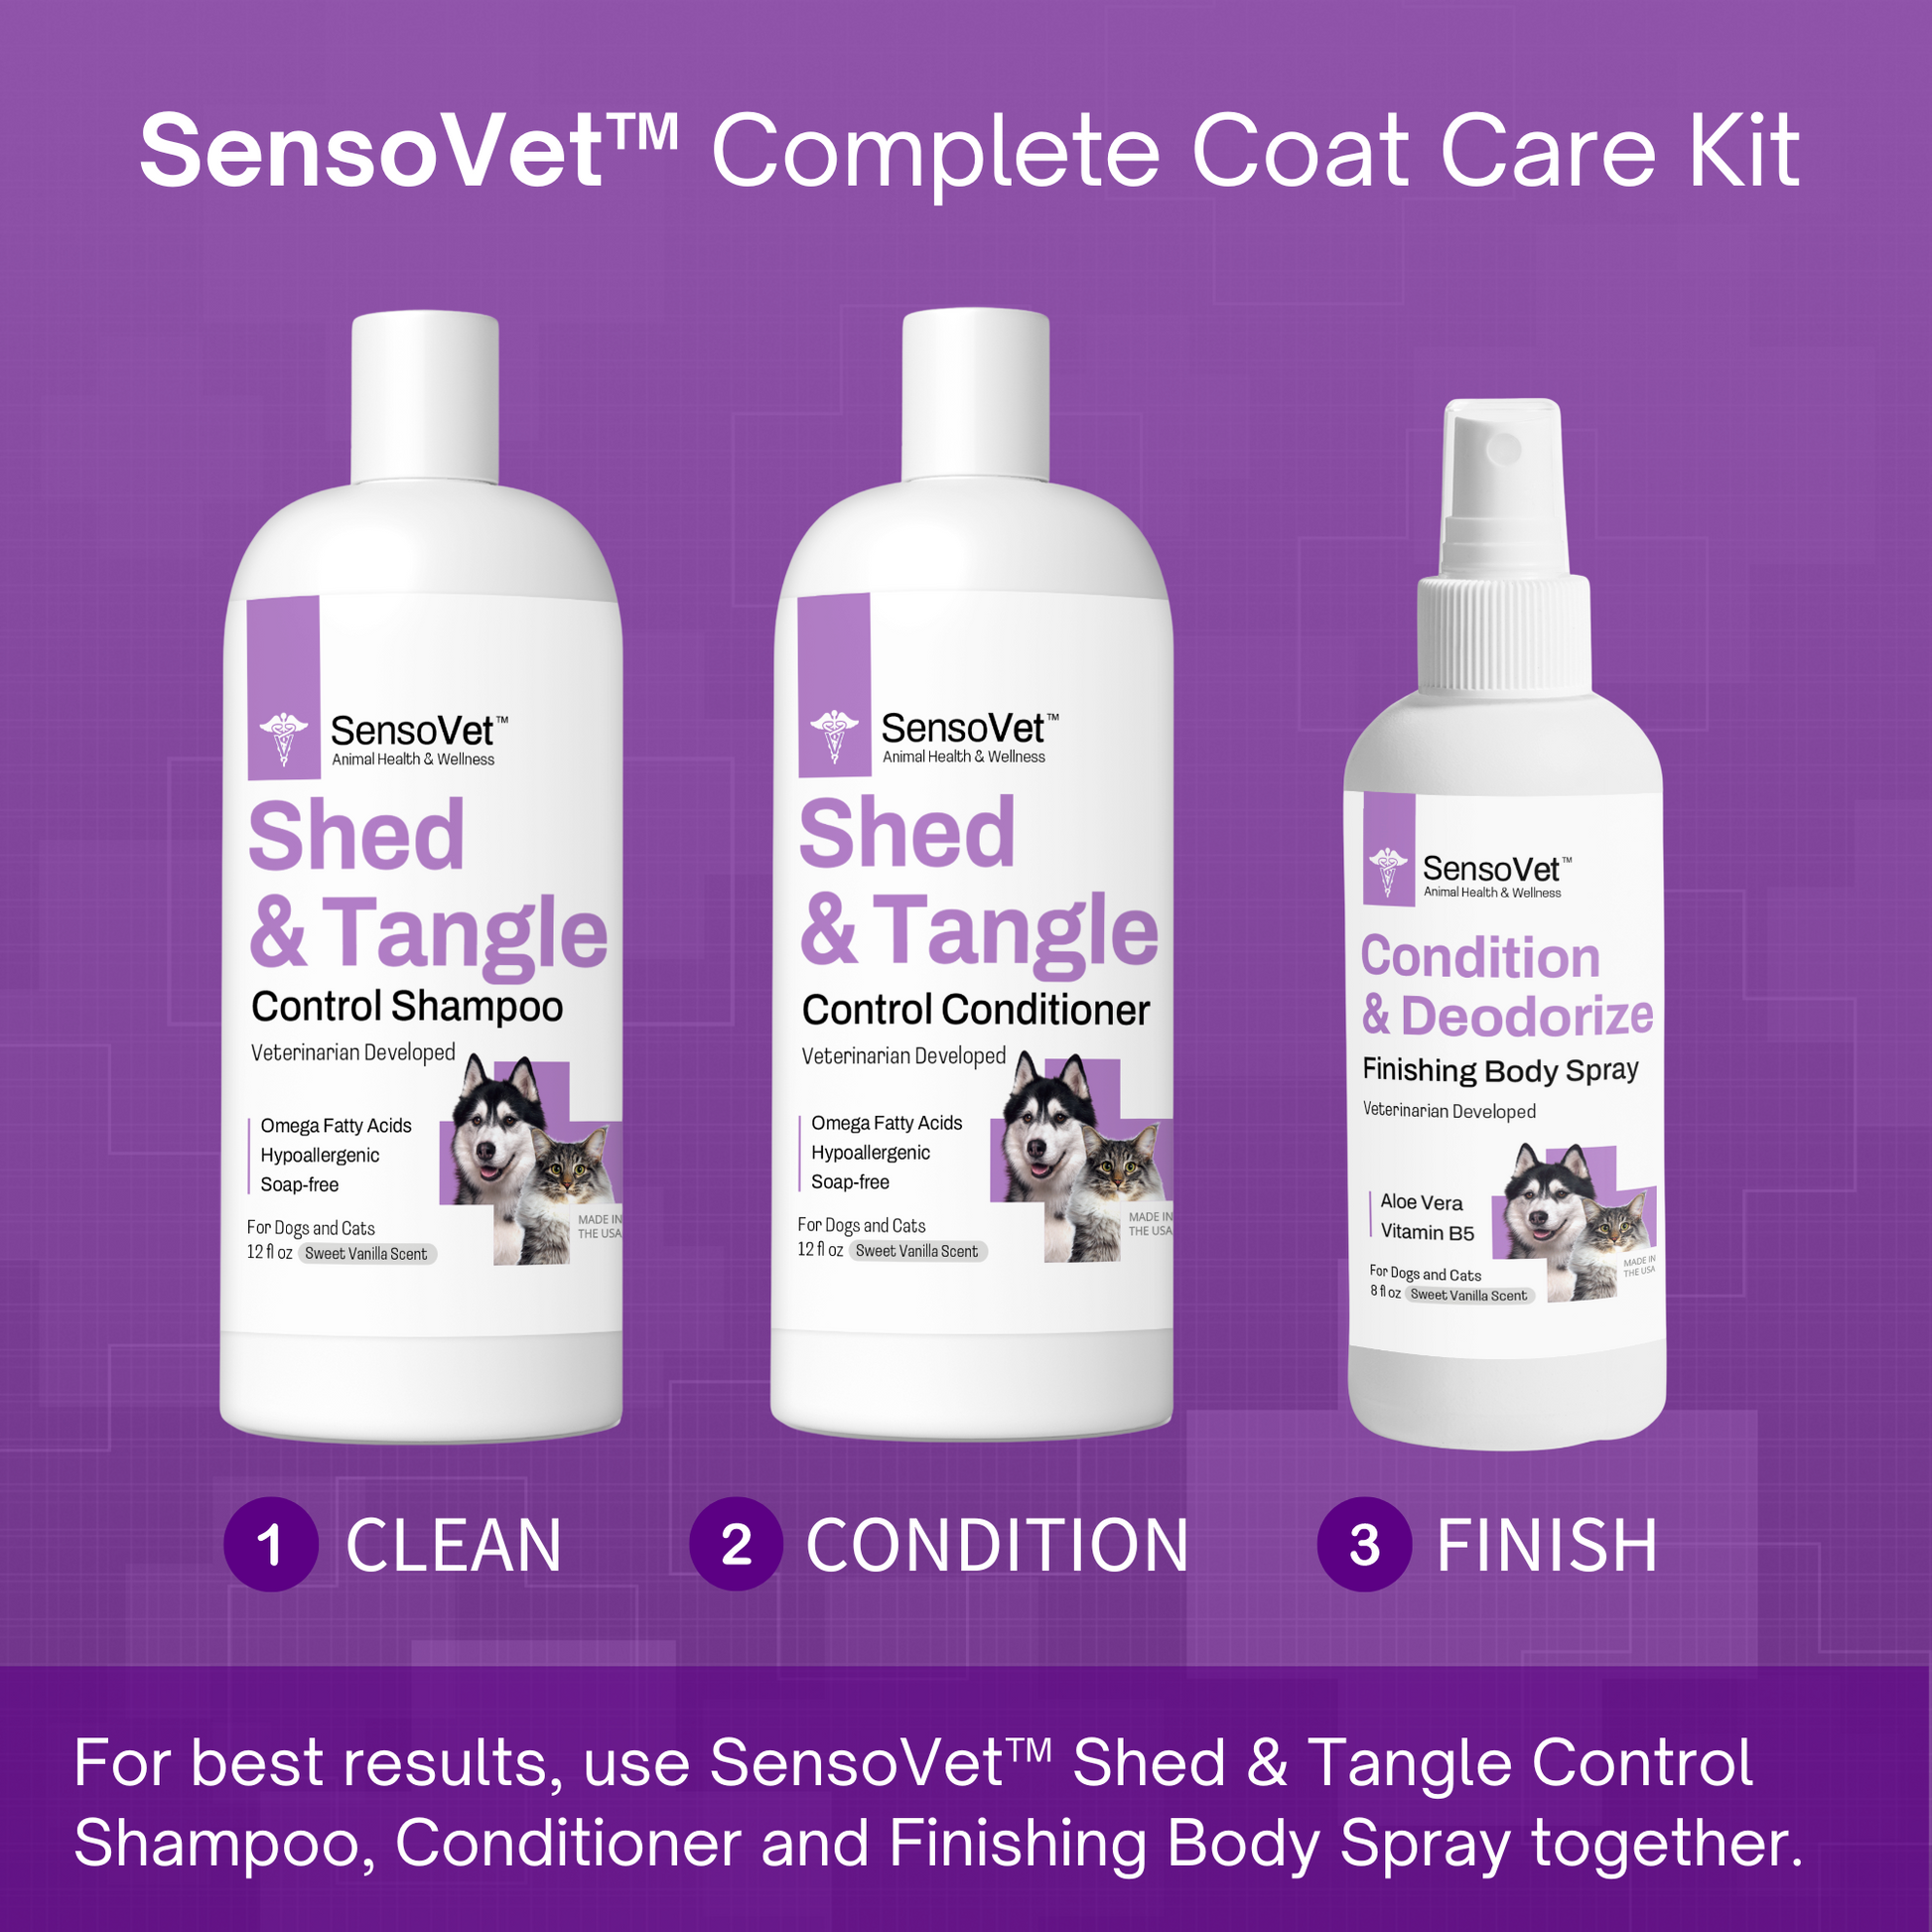 SensoVet complete coat care kit. For best results, use our shed and tangle control shampoo, conditioner, and finishing body spray together